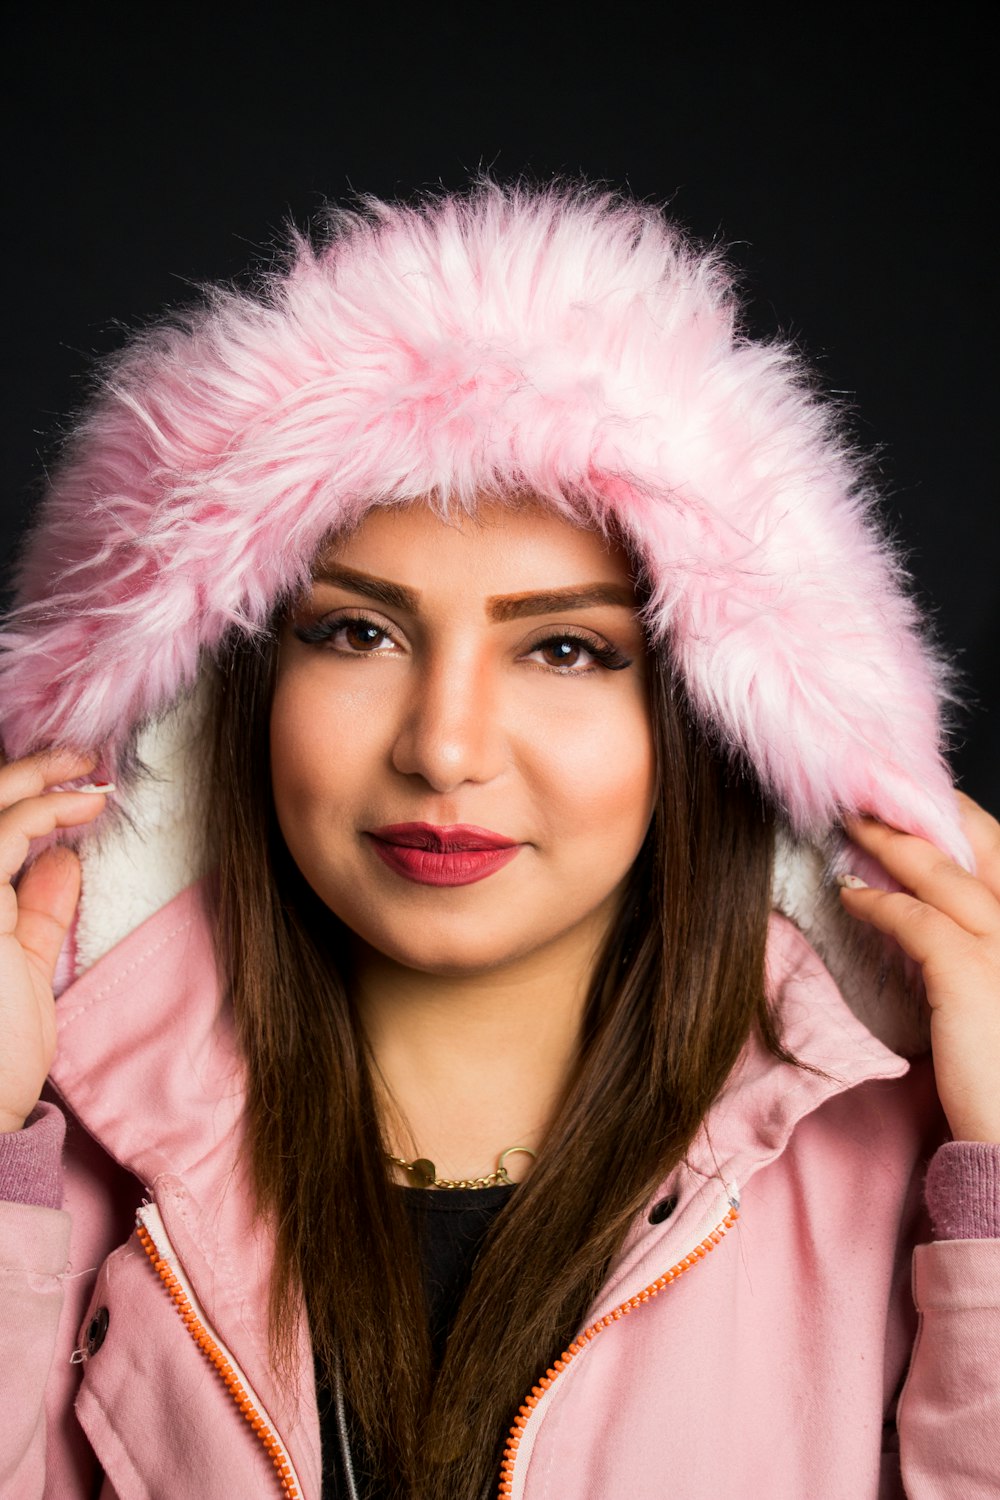 a woman wearing a pink jacket and a furry hat